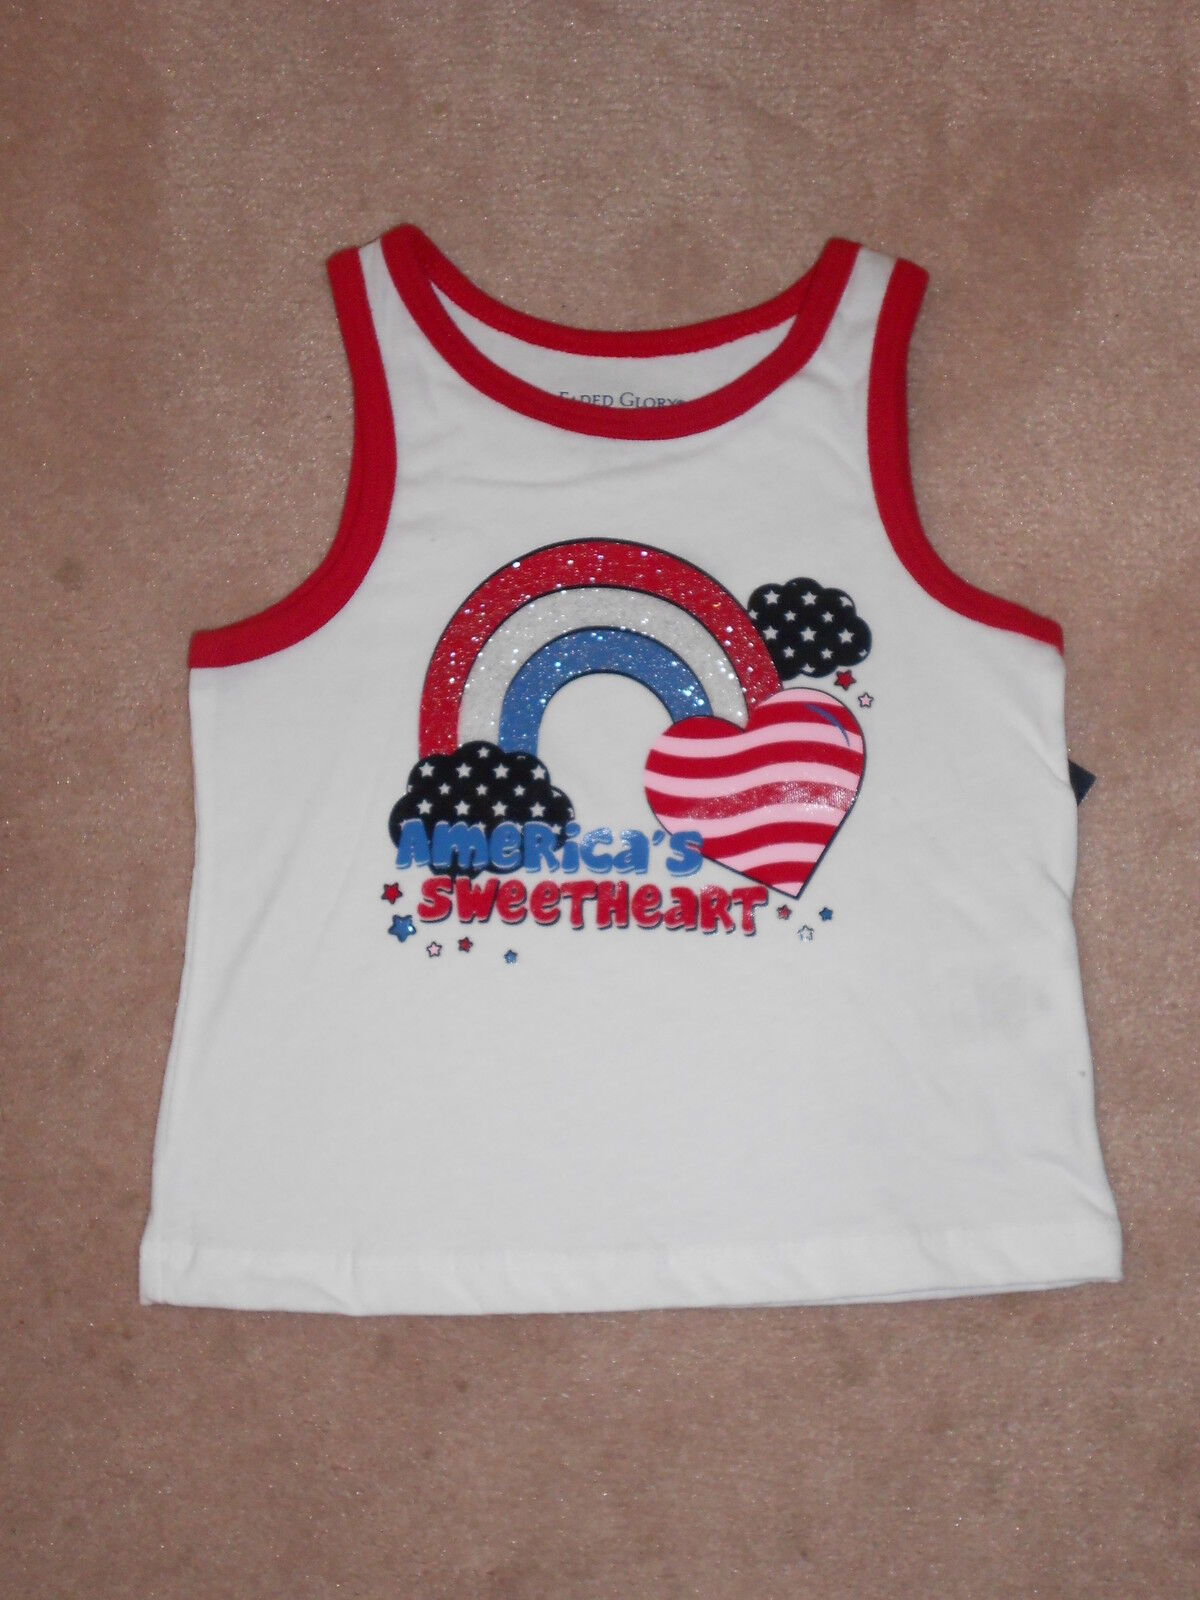 NEW, BABY GIRL\'S AMERICA\'S SWEETHEART TANK TOP, SIZE 18M